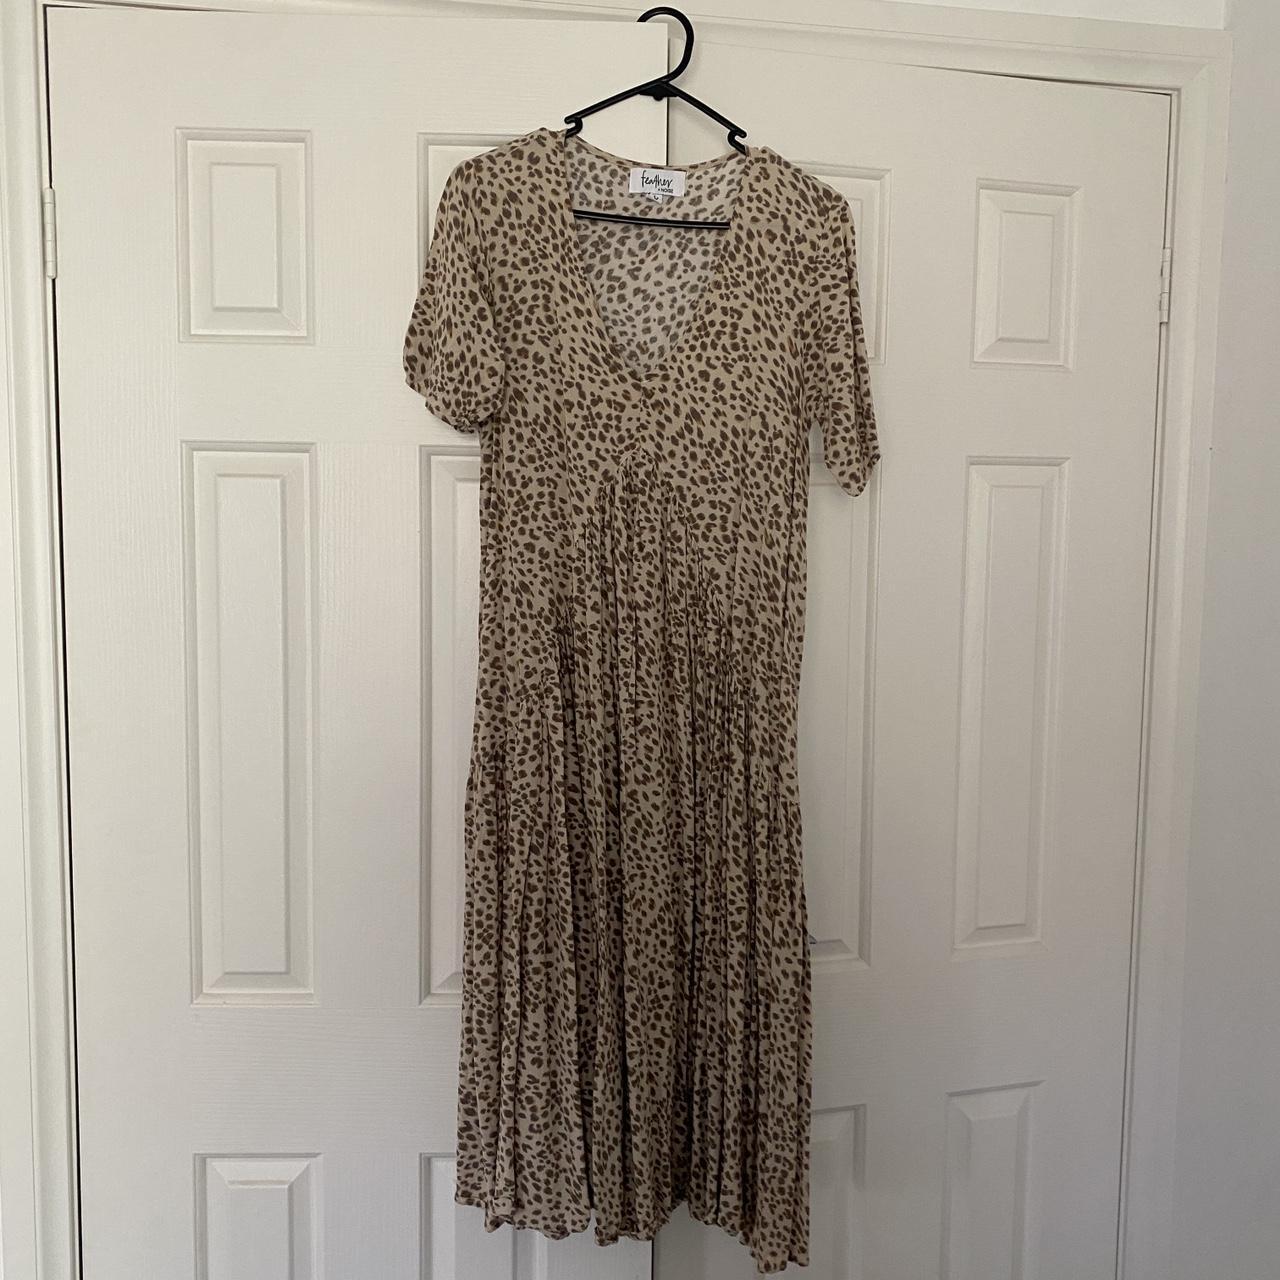 Feather and Noise dress - Size 8 but would fit 8-10 - Depop